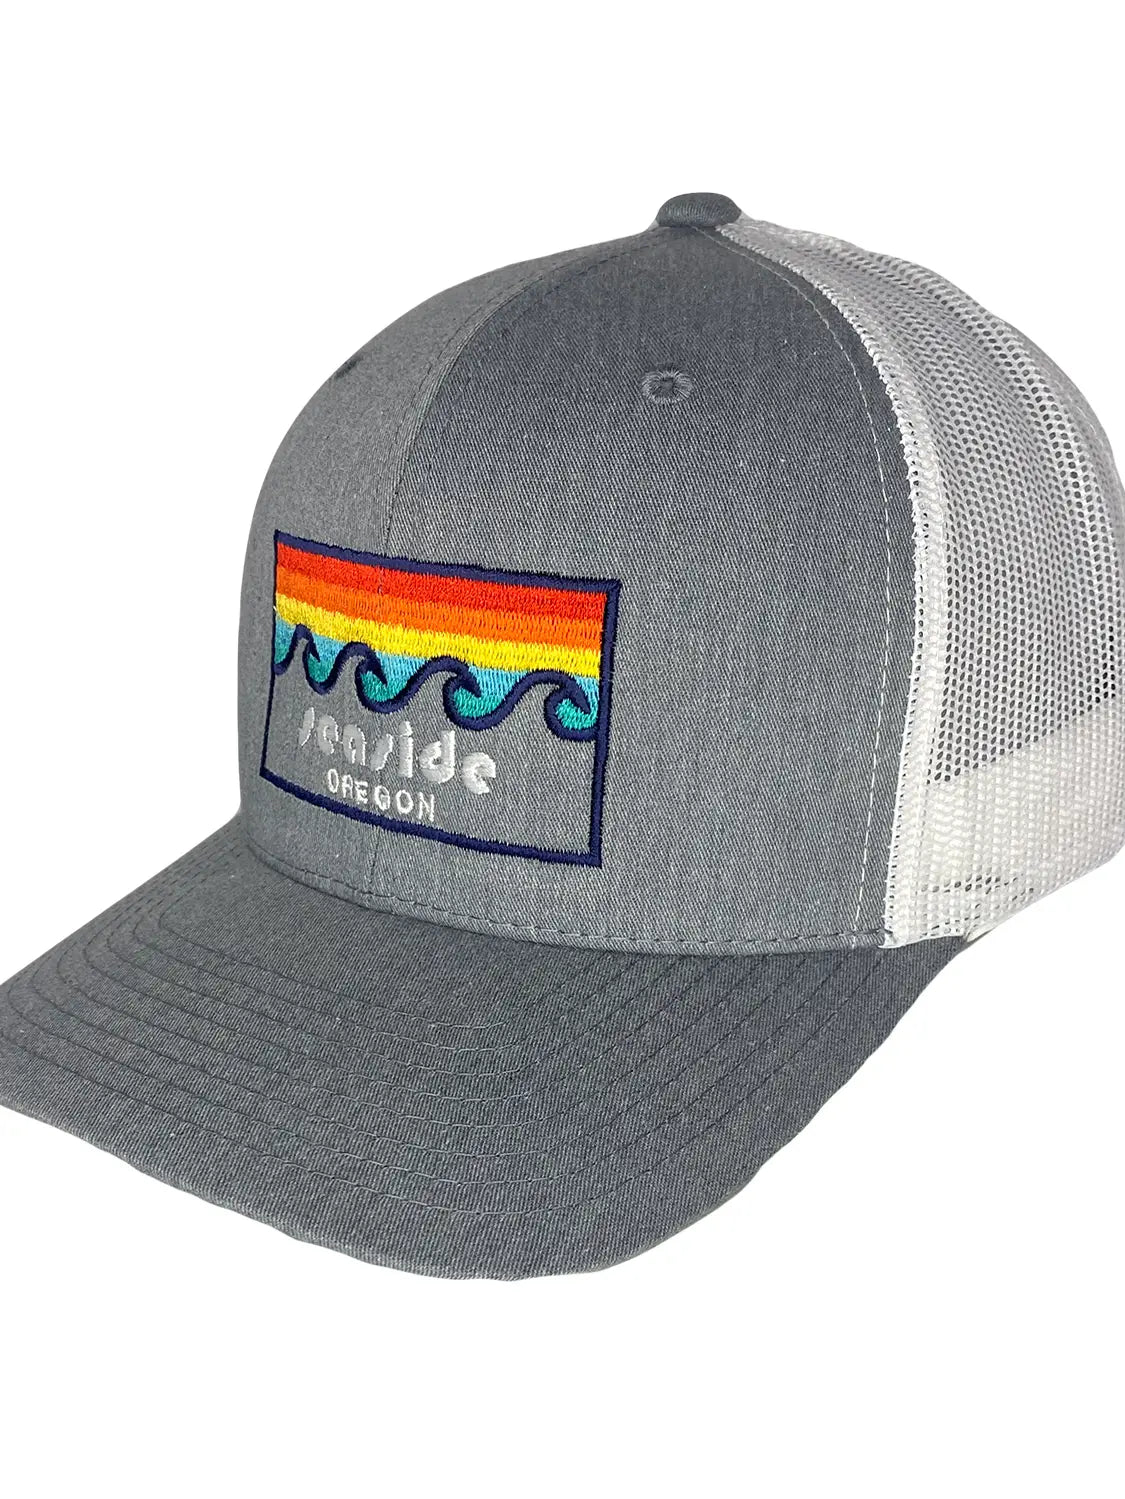 Port Townsend Waves and Stripes Trucker Cap